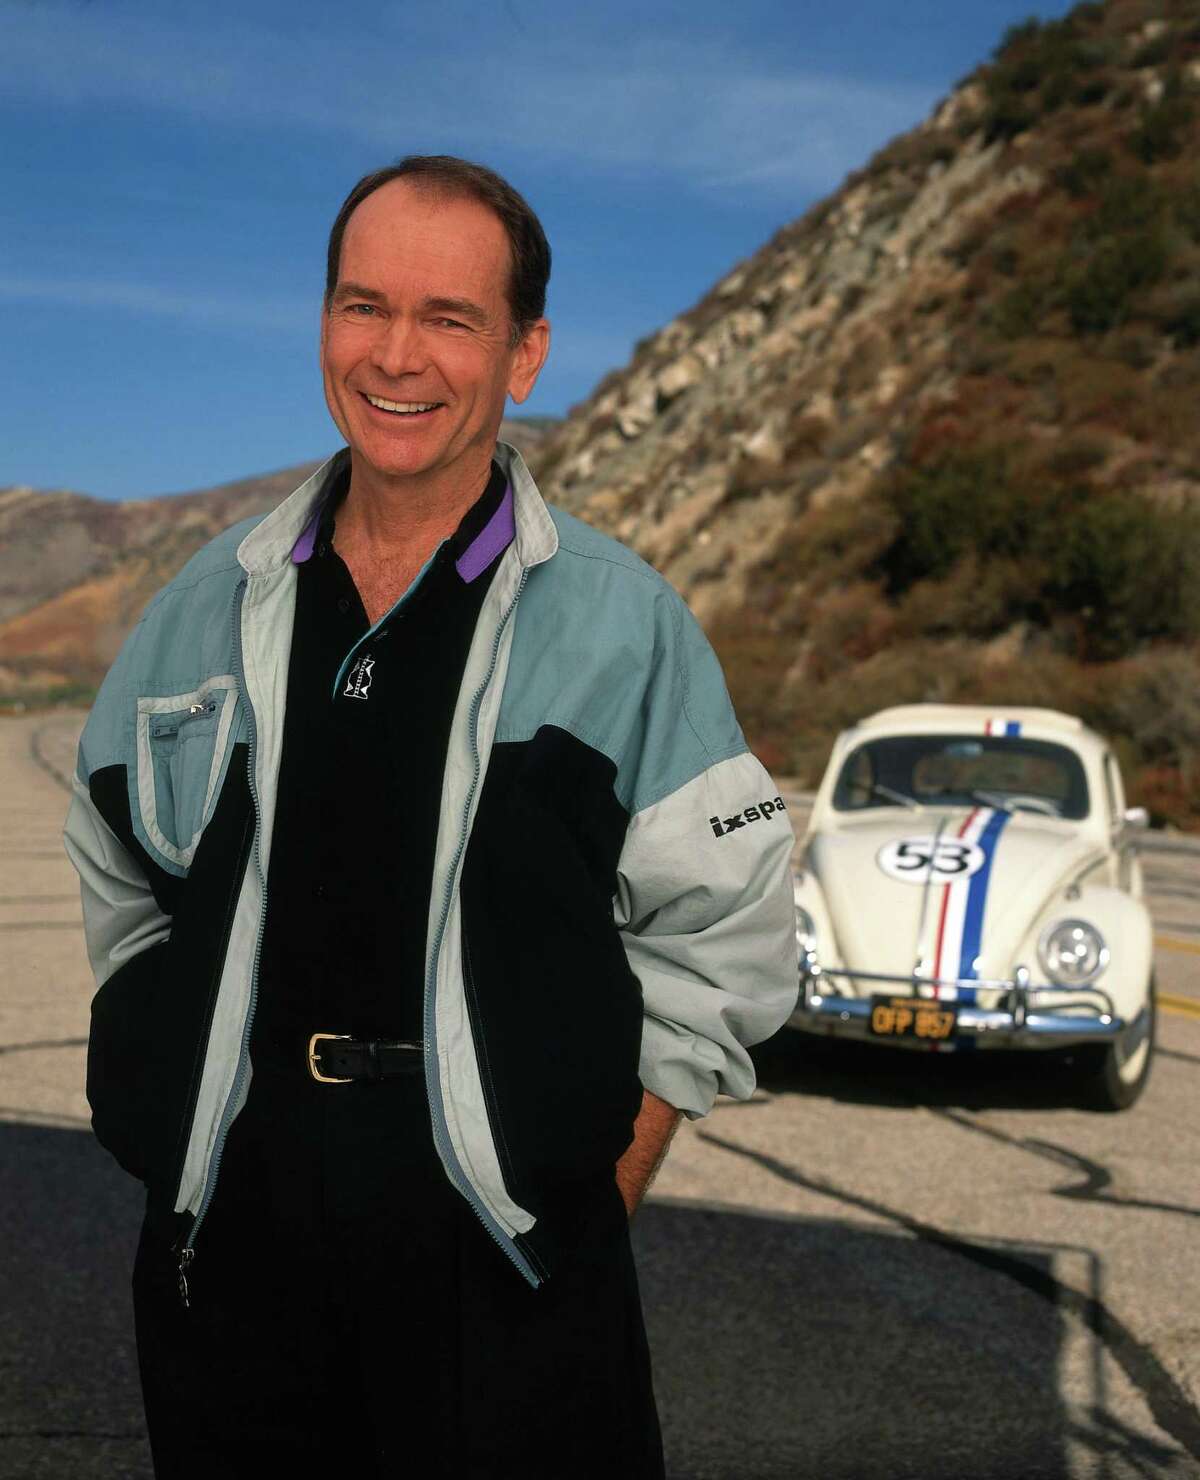 This 1997 photo provided by ABC shows actor Dean Jones, who starred in the Disney classic film “The Love Bug” and the later television remake of the film. Jones, whose boyish good looks and all-American manner made him Disney’s favorite young actor for such lighthearted films as “That Darn Cat!” and “The Love Bug,” has died of Parkinson’s disease. He was 84.